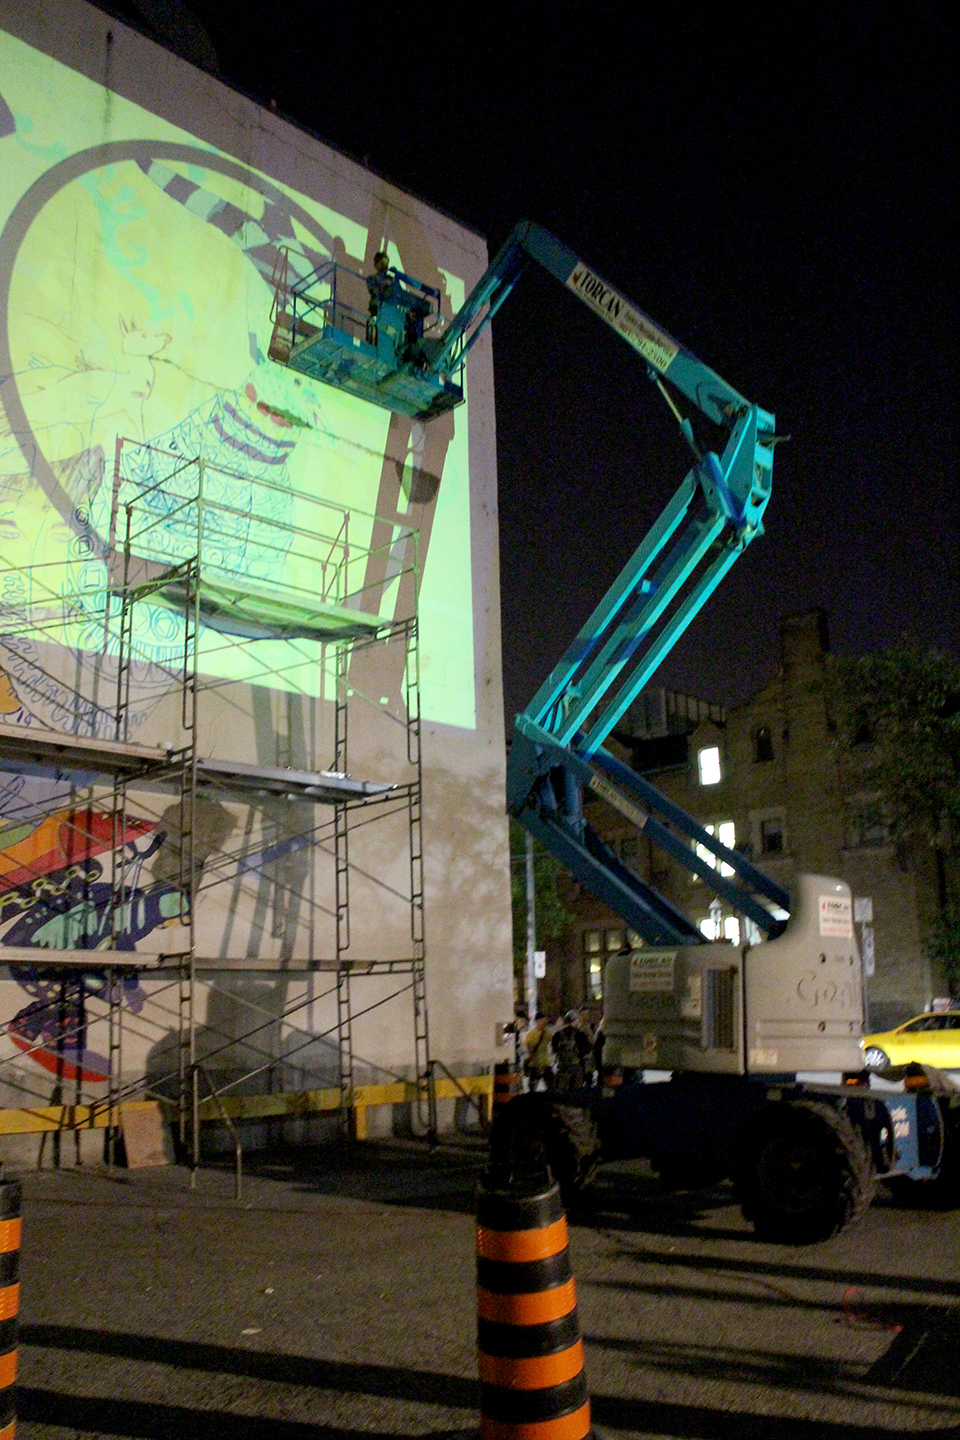 The mural was projected on the wall at night so that the artists could see and trace the outlines. Photo by Alexa Hatanaka.